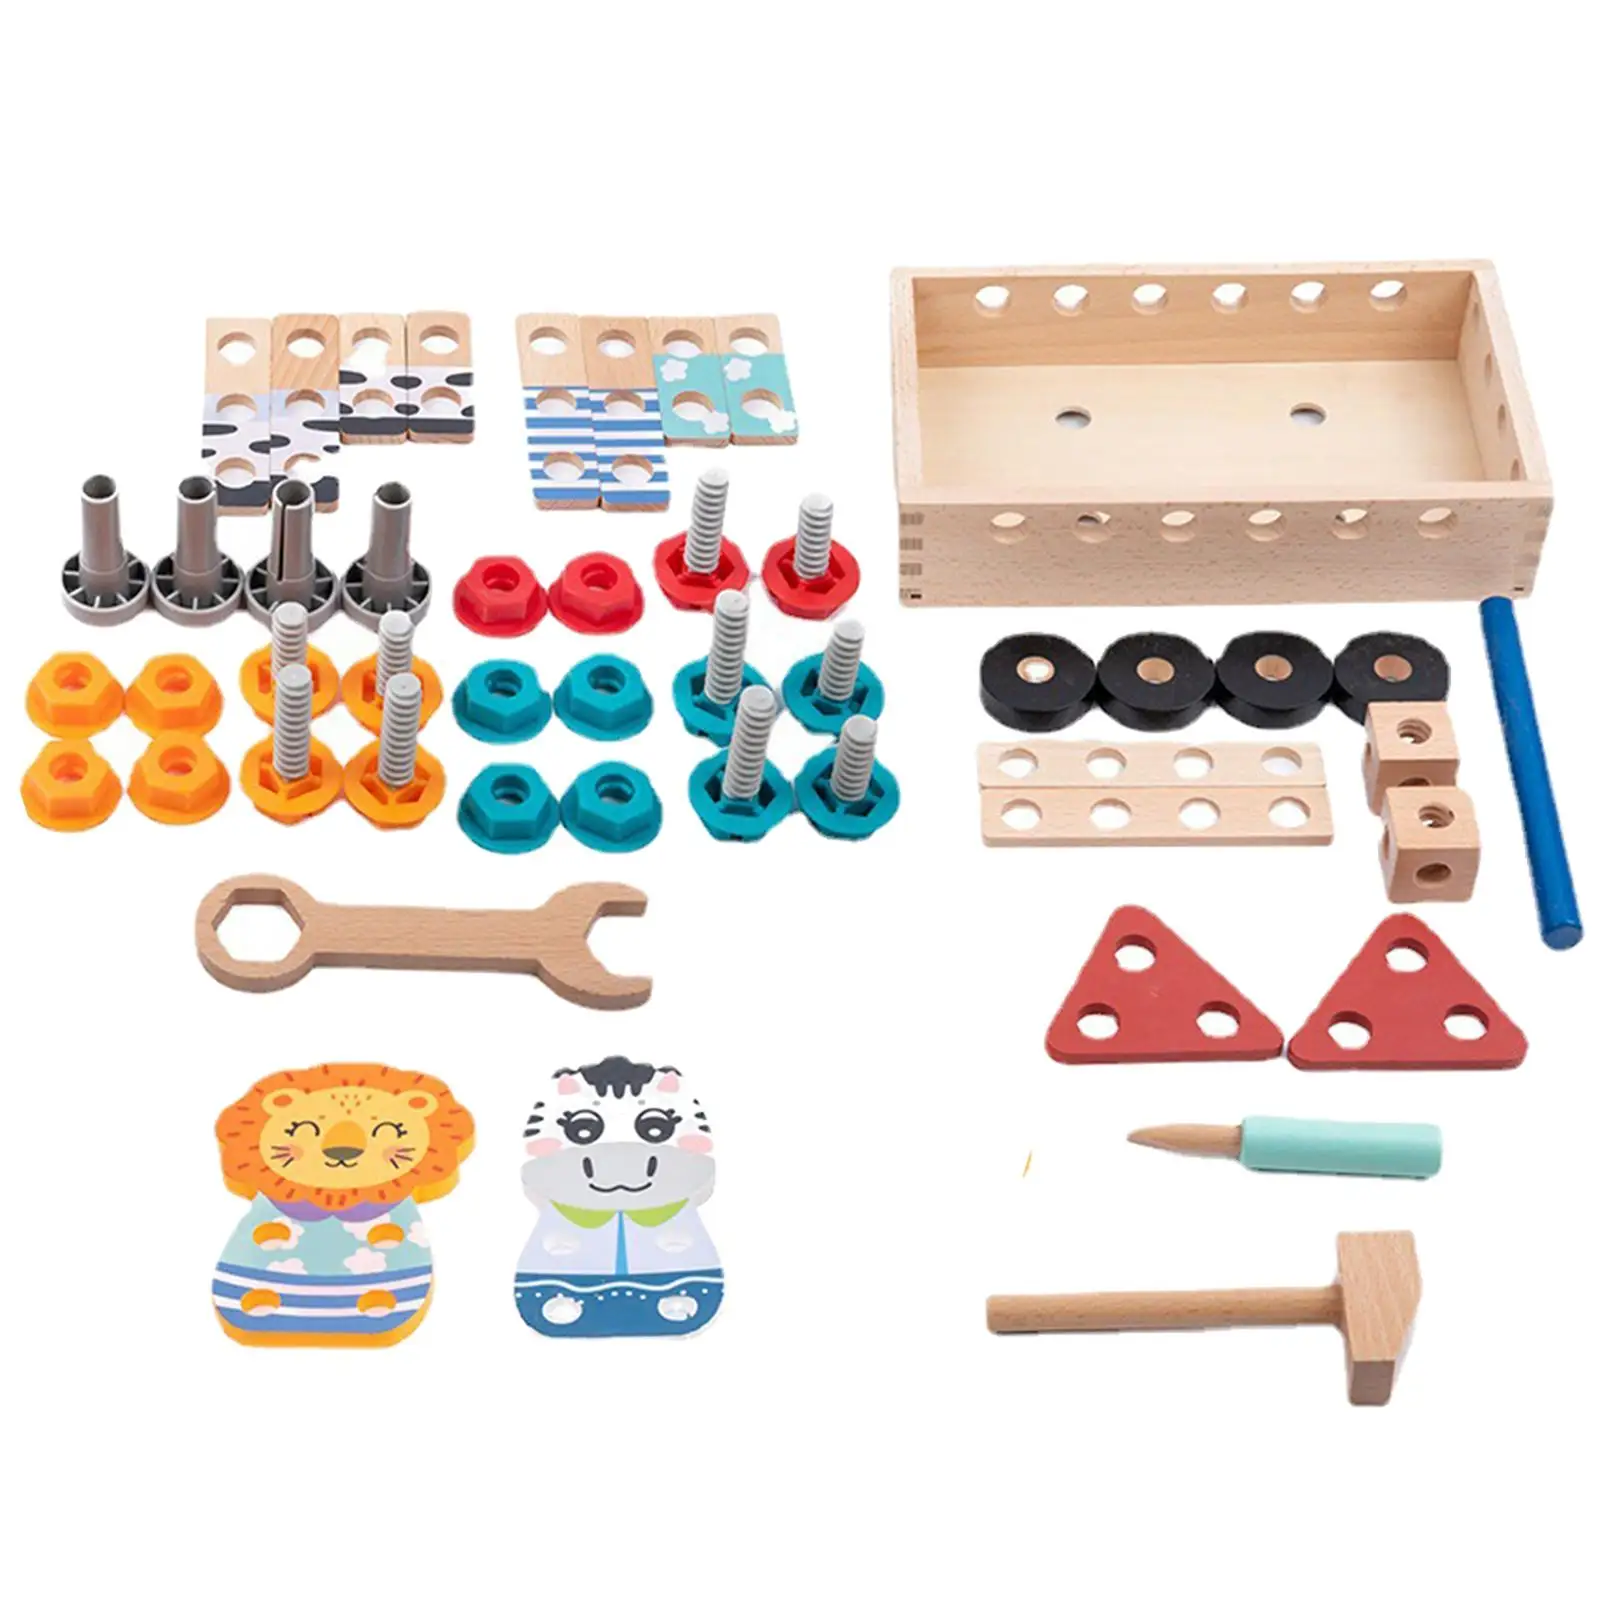 Kids Construction Toy Set Creative Portable Cognitive montessori Toolbox Set for Activities Role Play Preschool Education